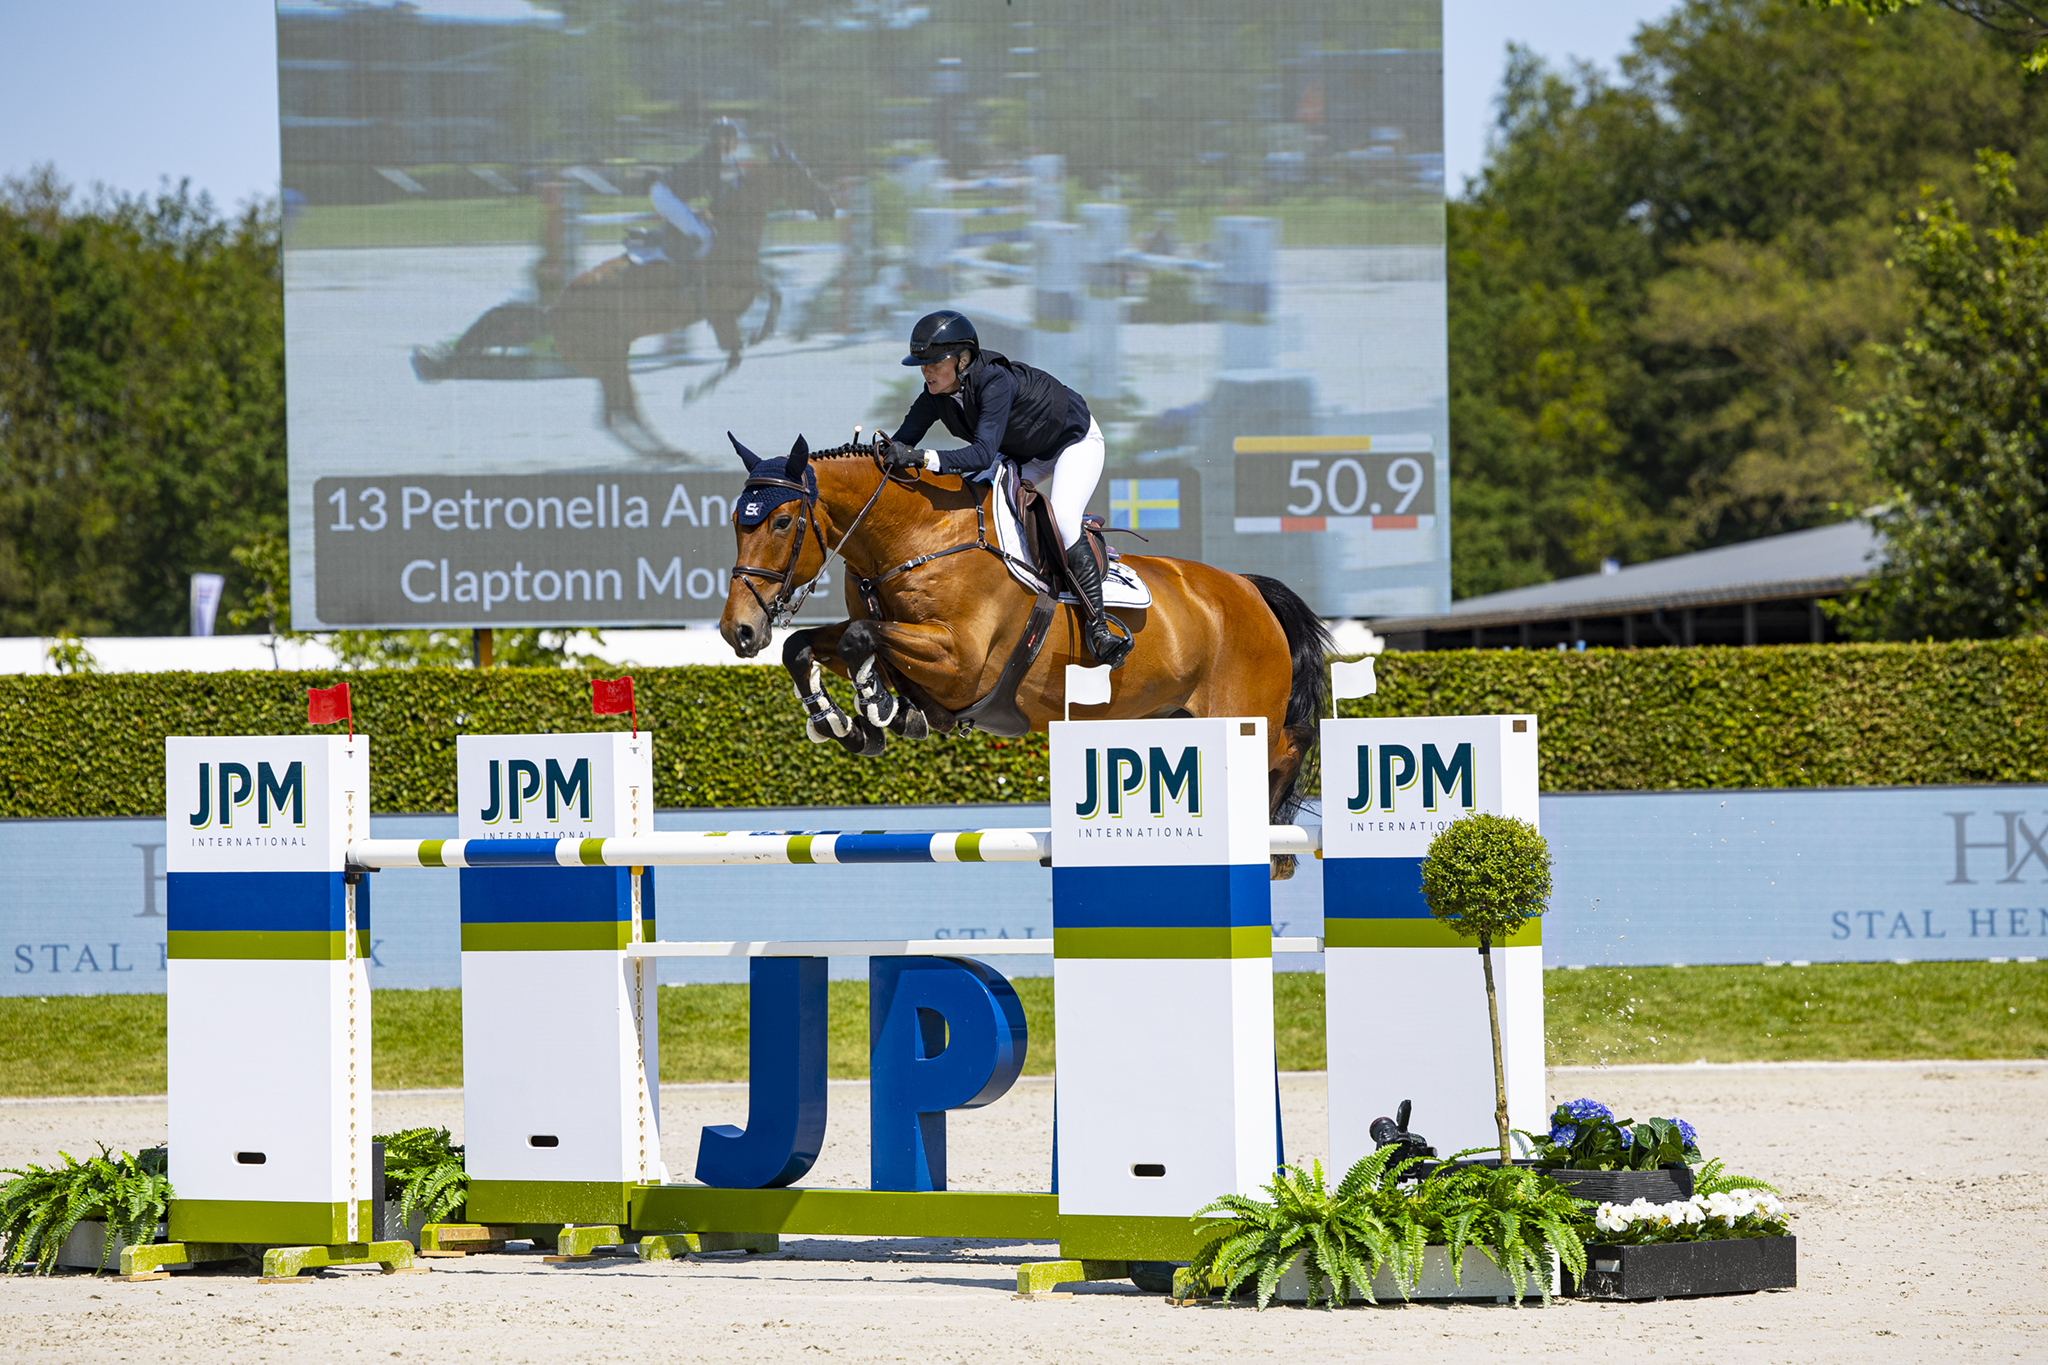 Petronella Andersson leaves all competition behind in Grand Prix of Kessel